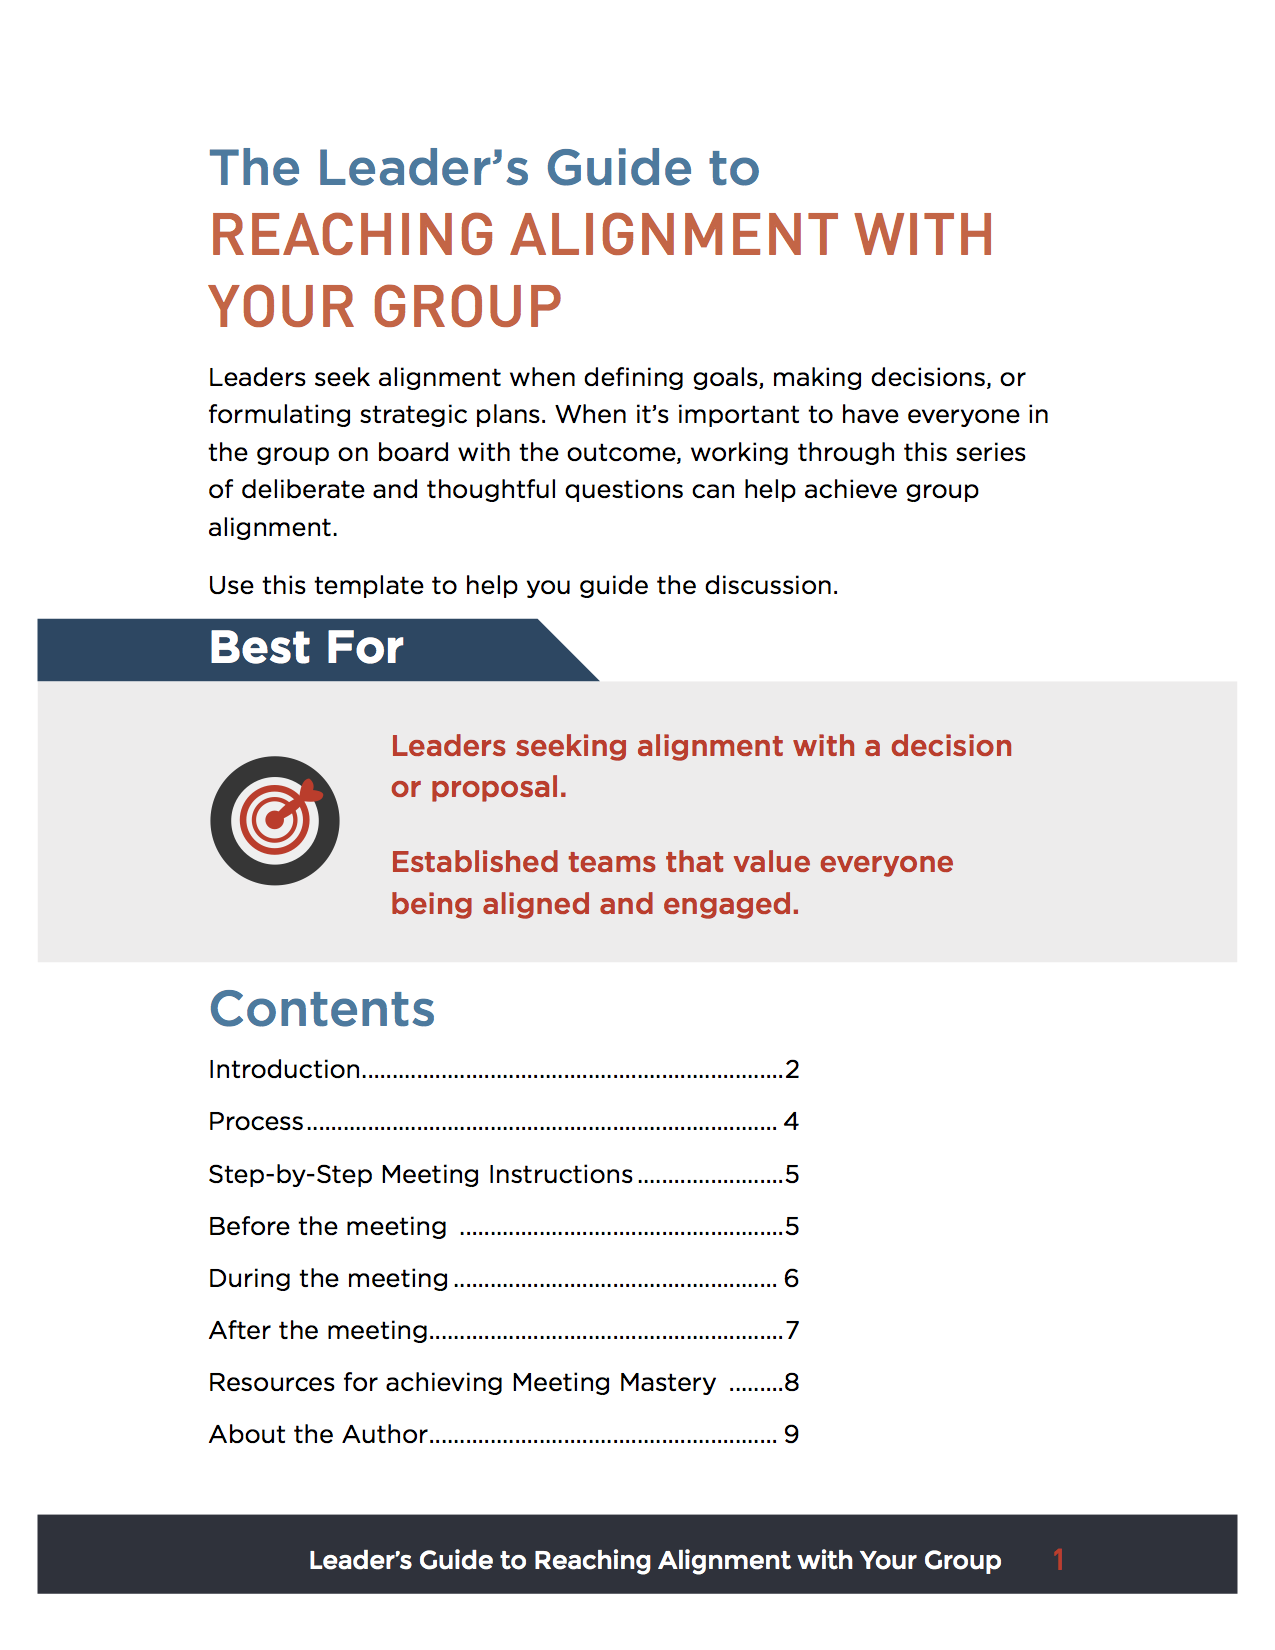 The Facilitator's Guide to Getting Alignment with Your Group